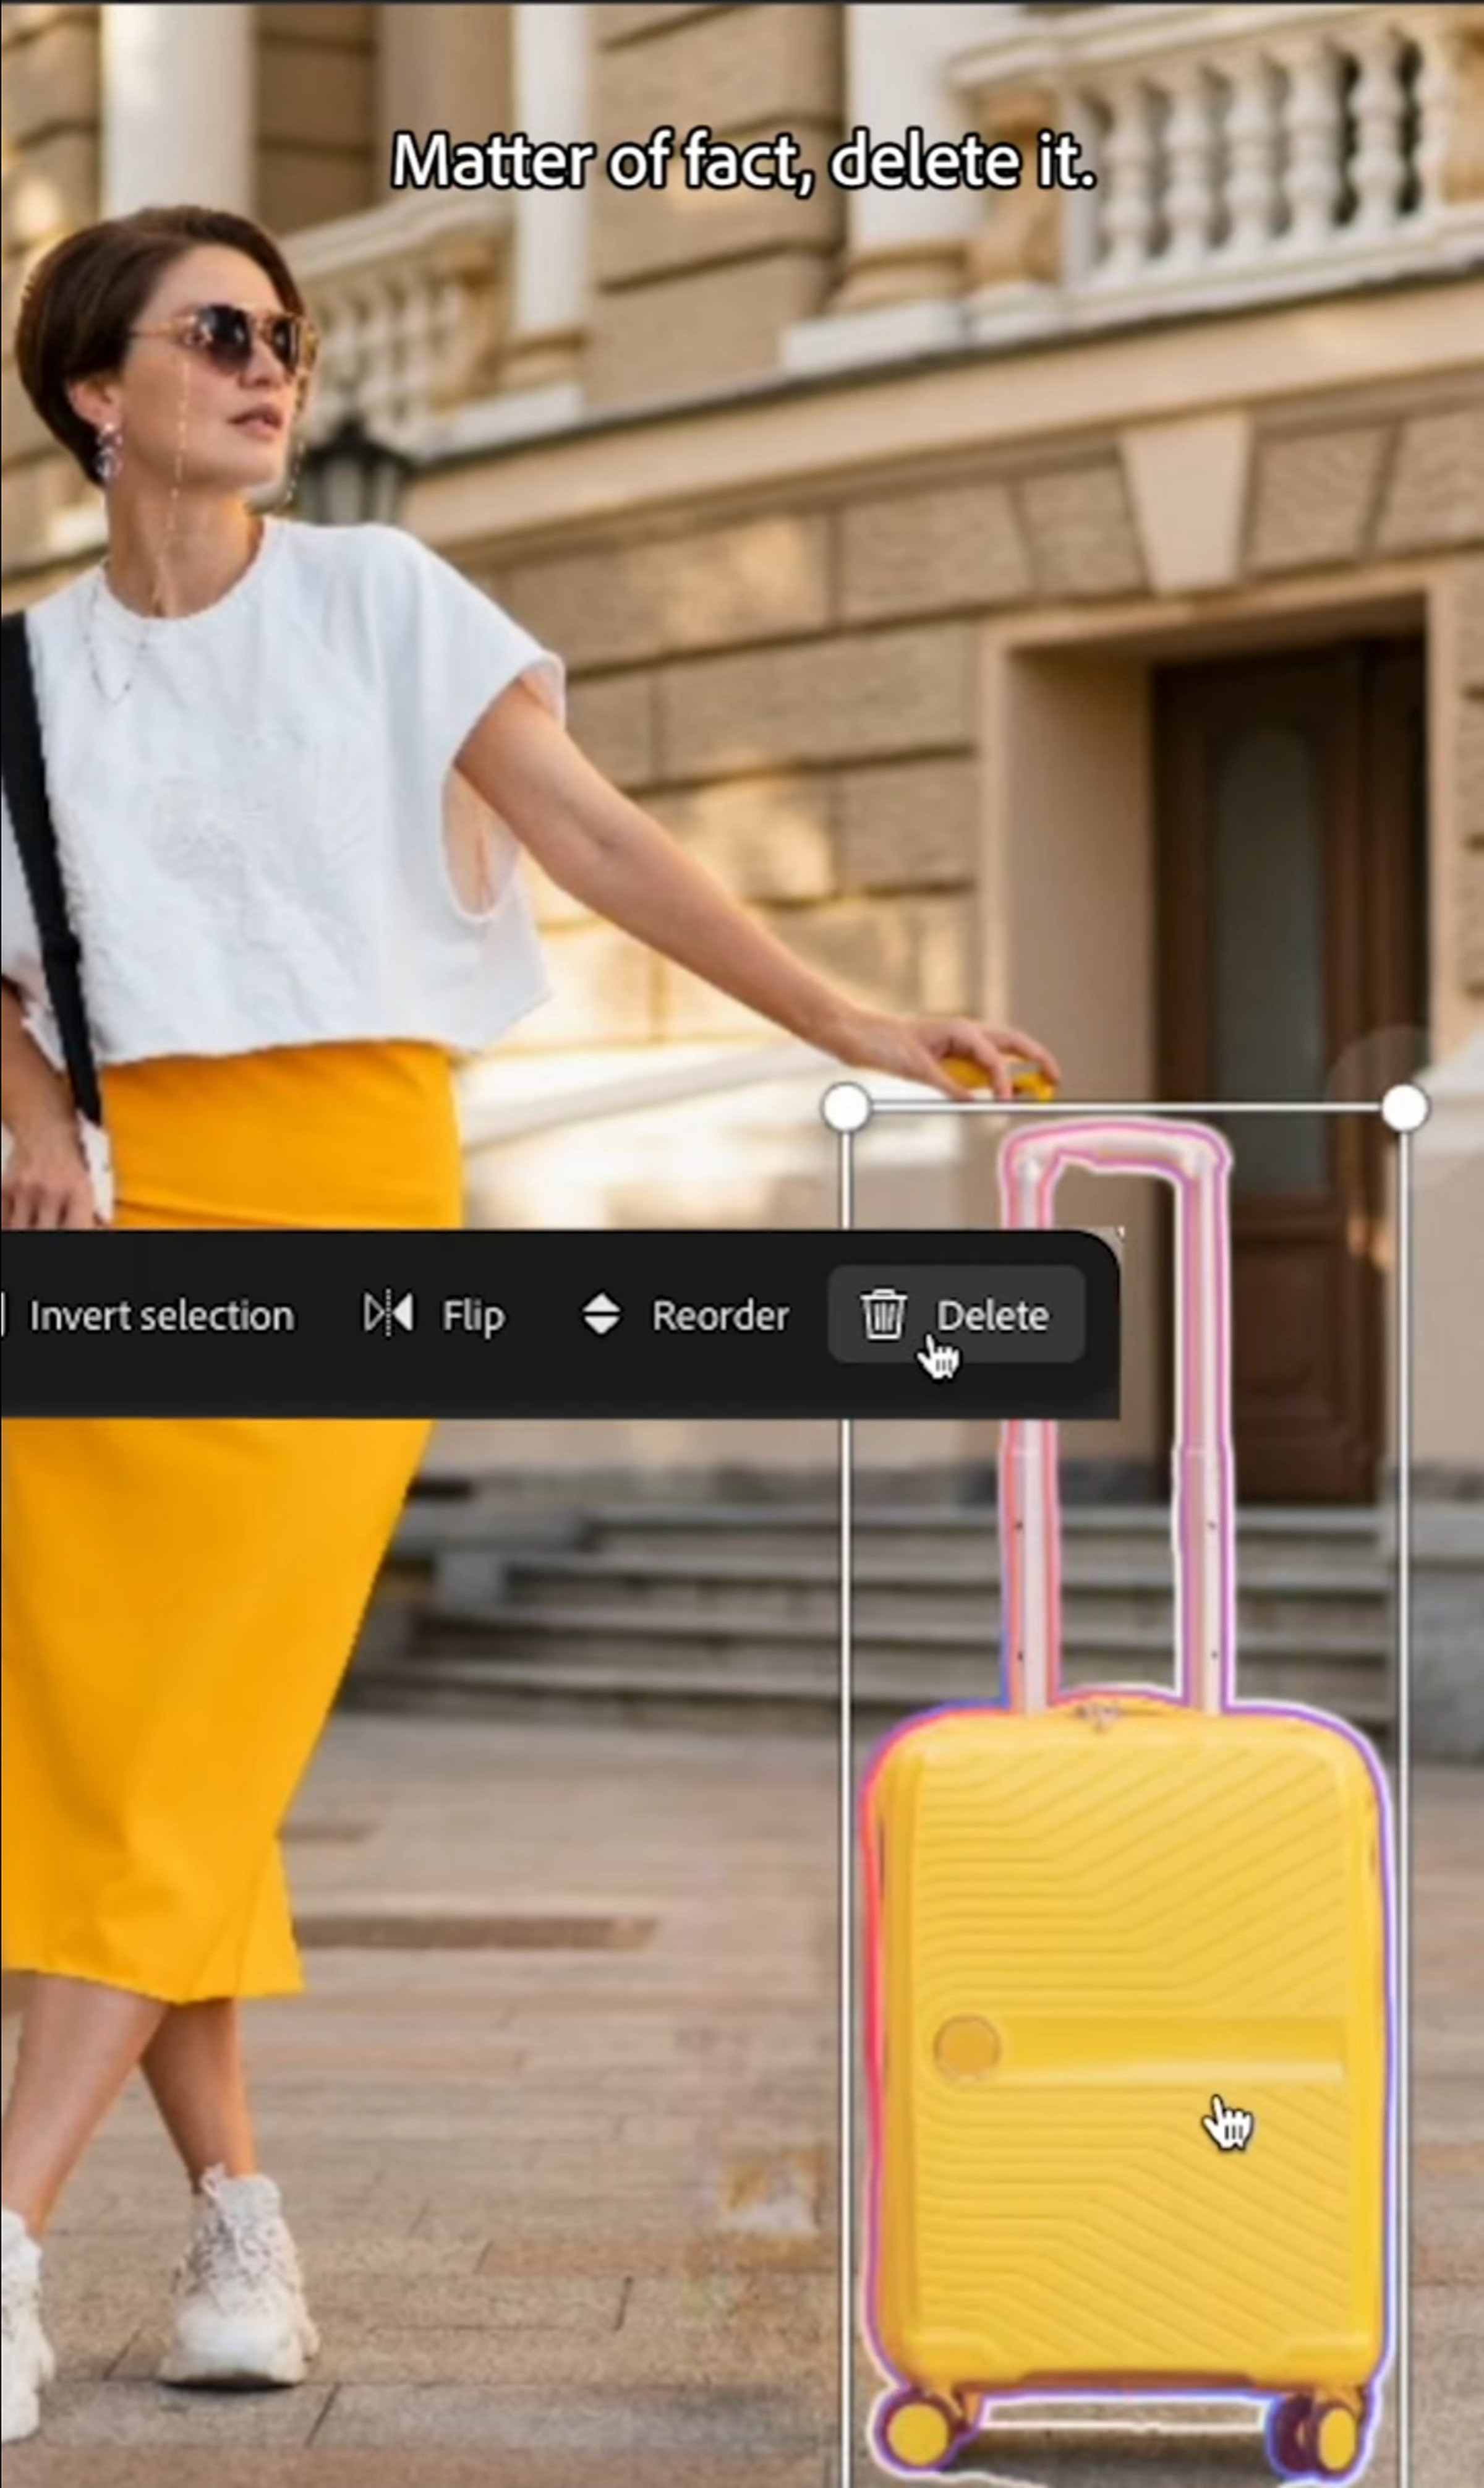 A screenshot of Adobe’s Project Stardust tool for photo editing, removing a suitcase from an image.